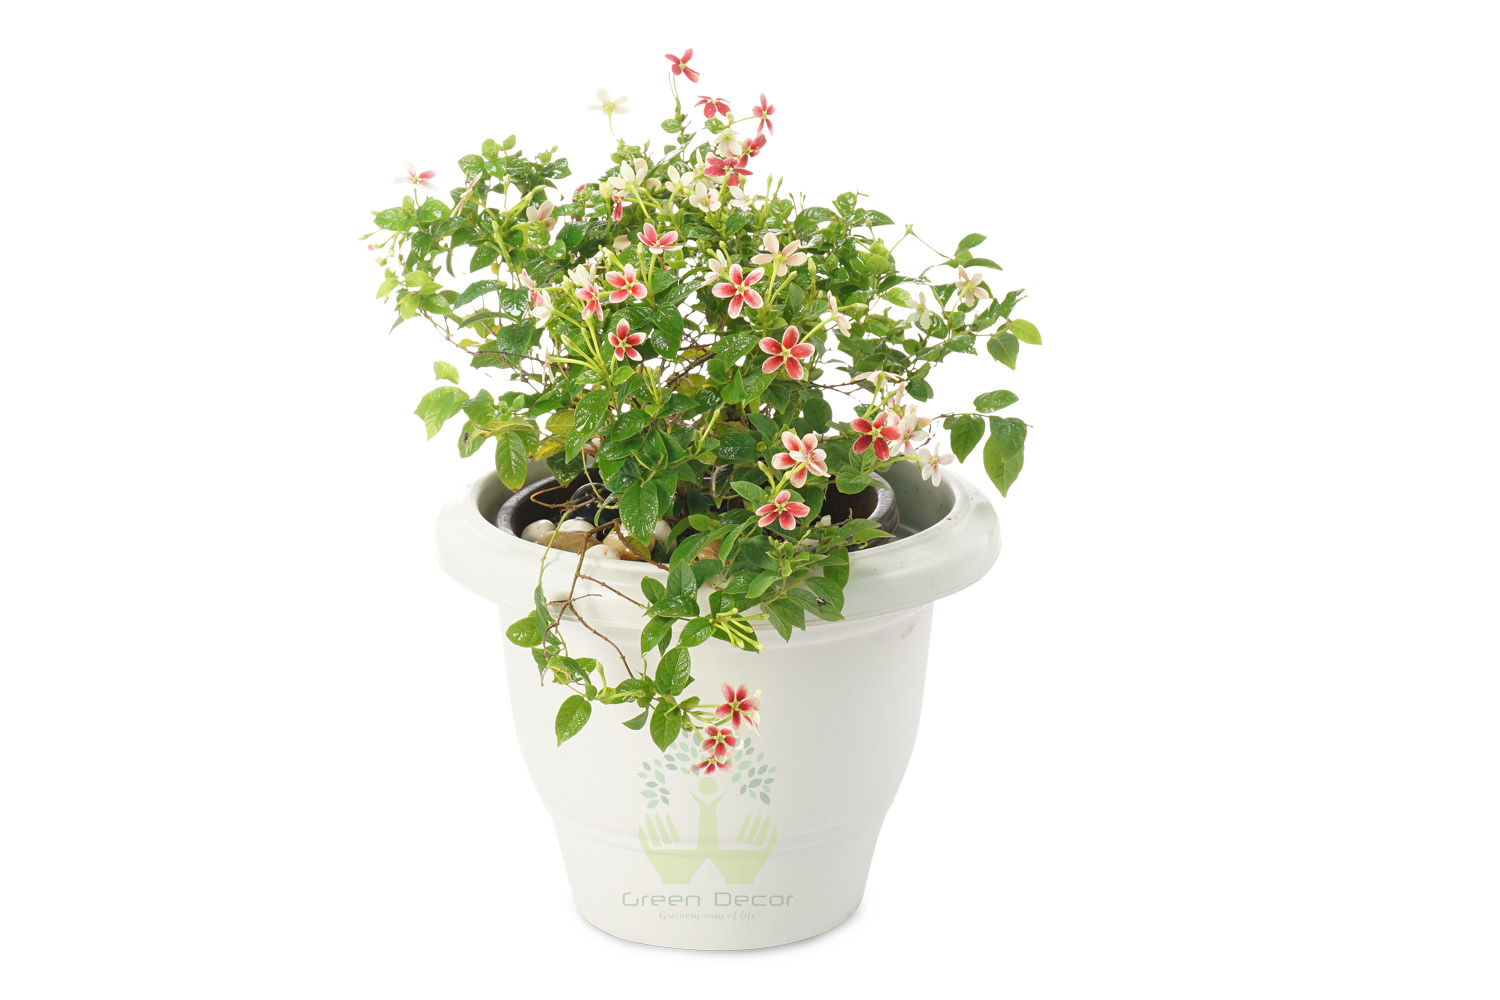 Buy Madhumalti Plants Front View , White Pots and seeds in Delhi NCR by the best online nursery shop Greendecor.